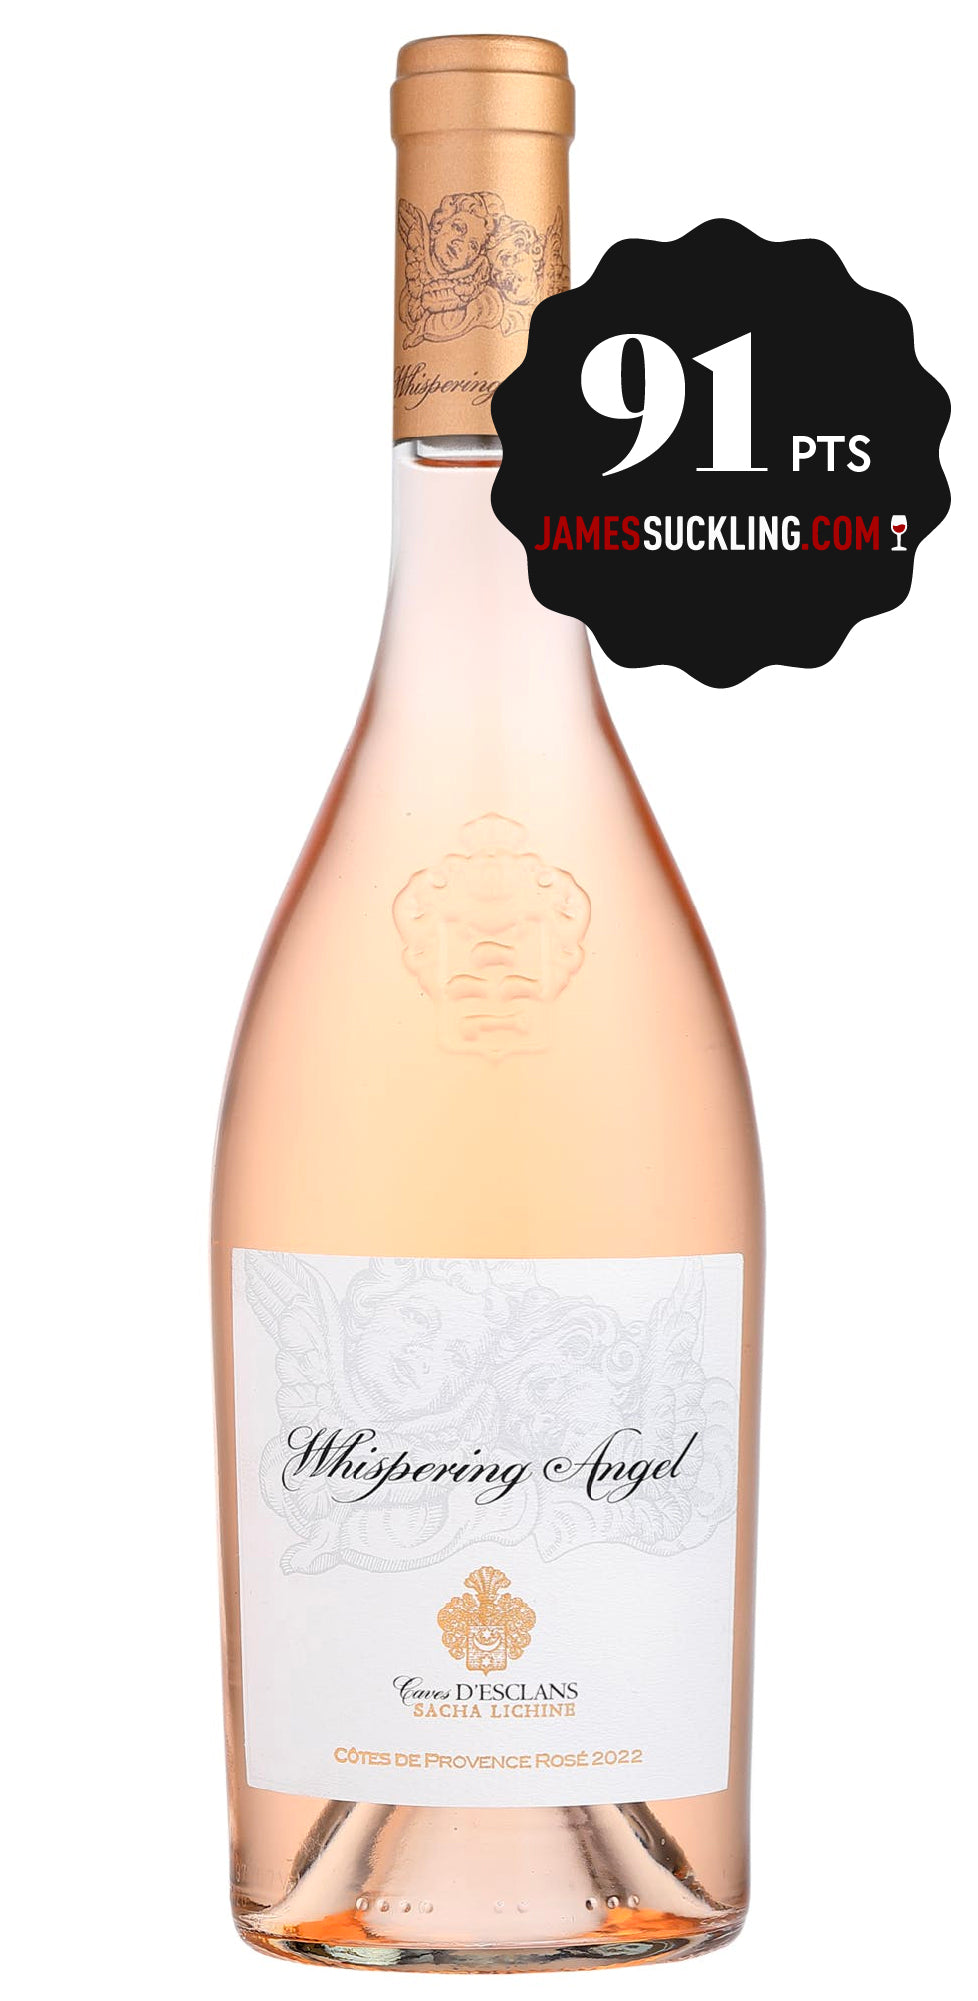 Chateau d'Esclans Rose Whispering Angel 2022